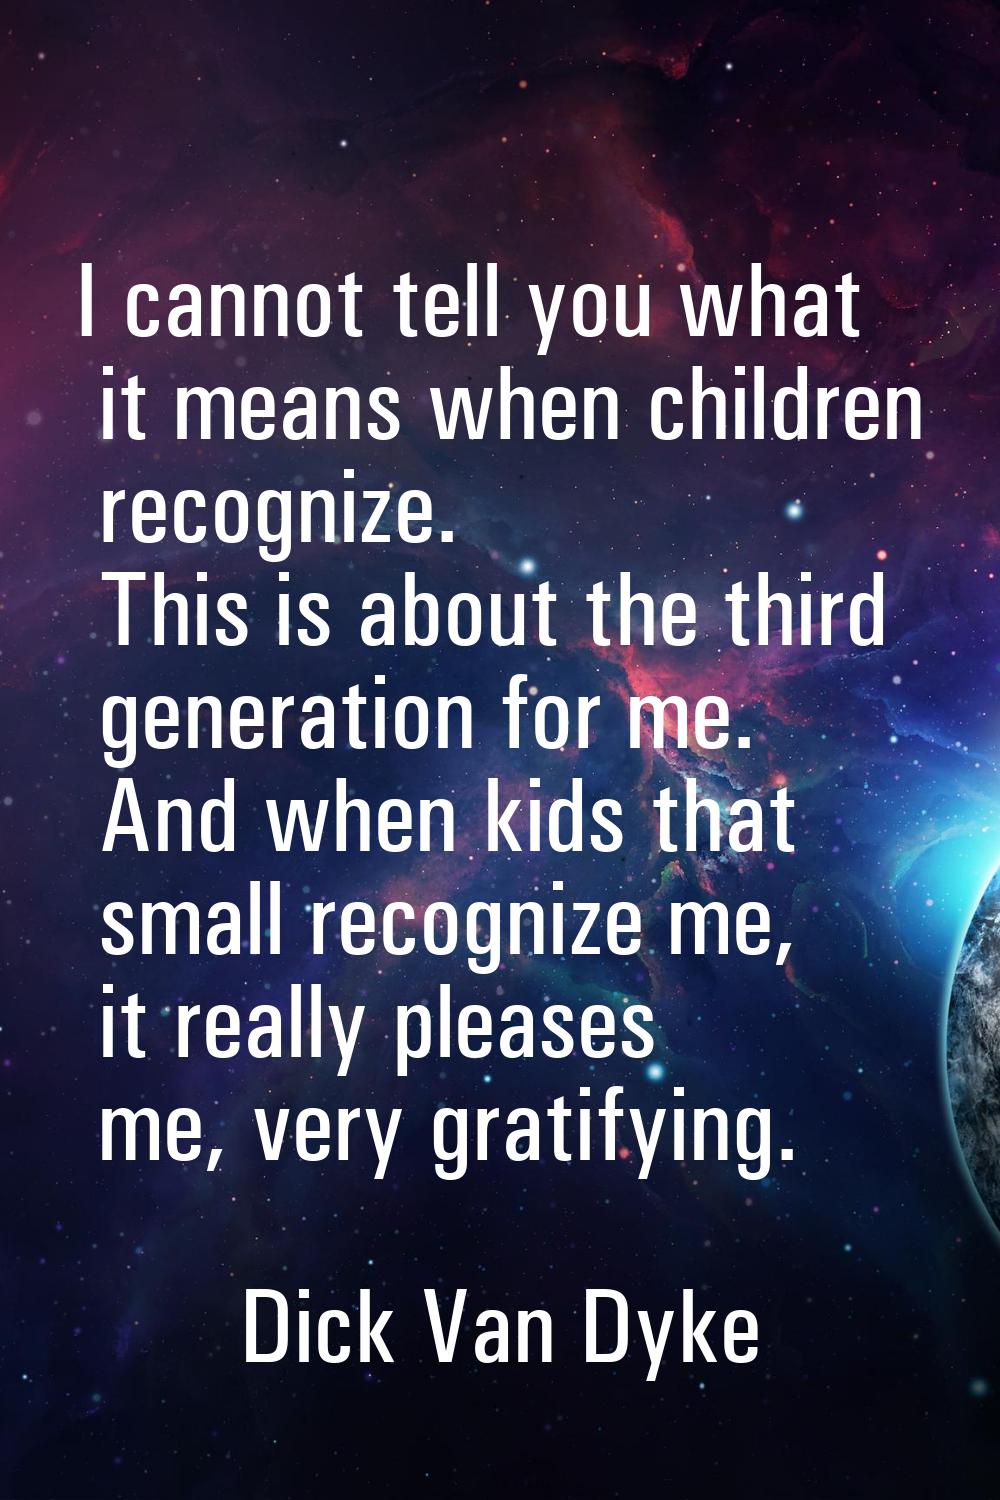 I cannot tell you what it means when children recognize. This is about the third generation for me.